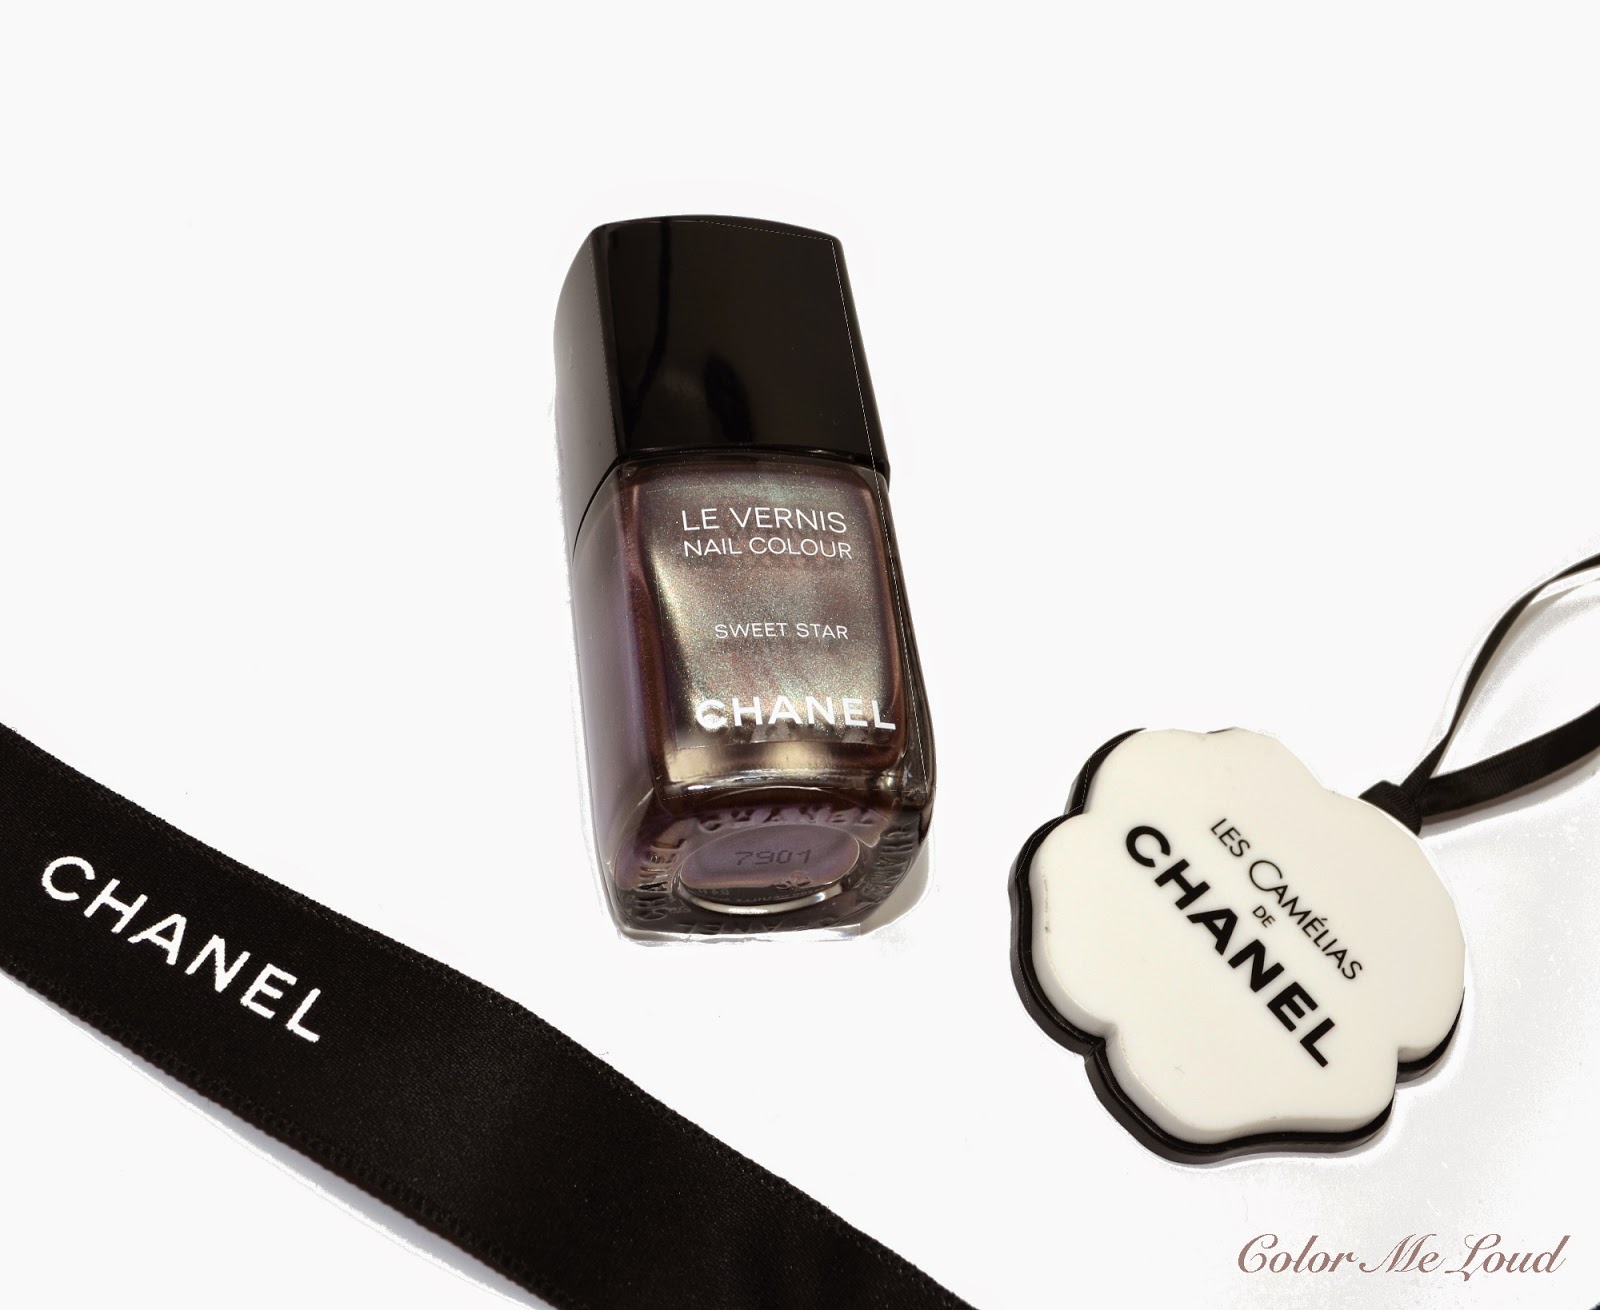 Chanel Le Vernis Sweet Star for Fashion Night Out 2014 Nail Polishes, Review, Swatch & Comparison 